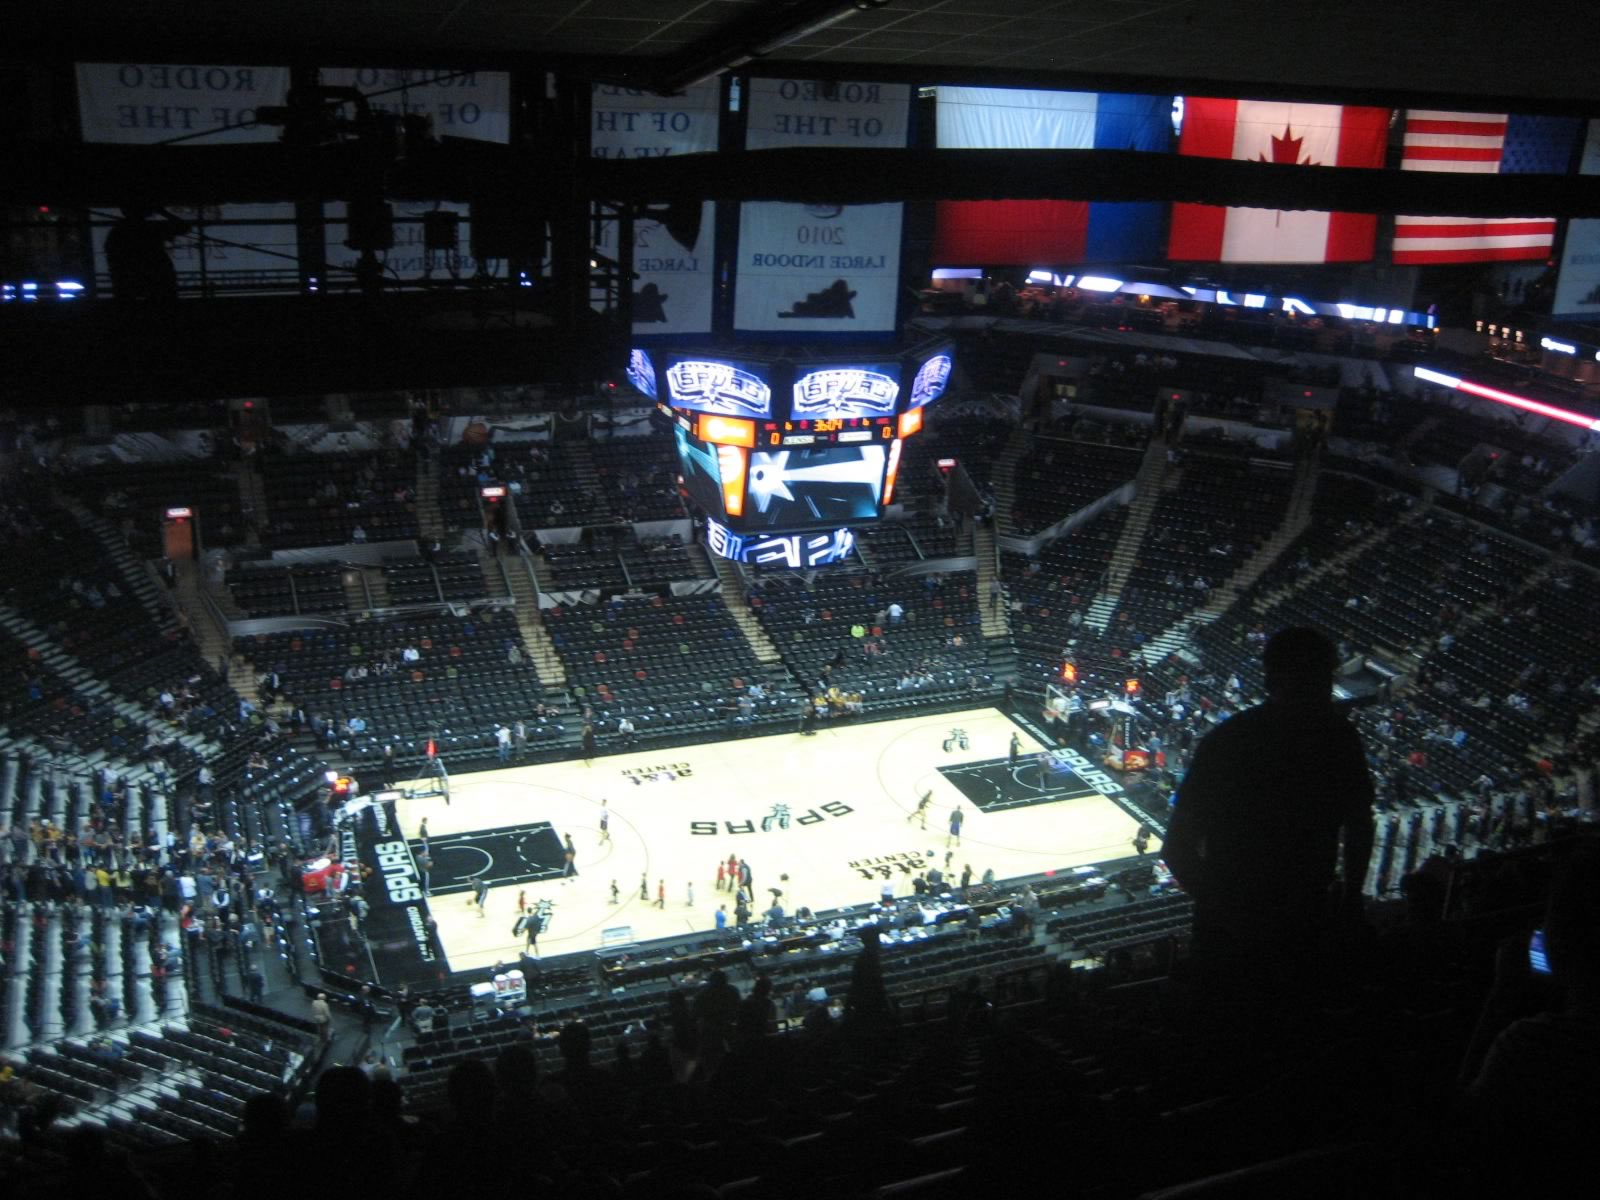 section 210, row 23 seat view  for basketball - at&t center